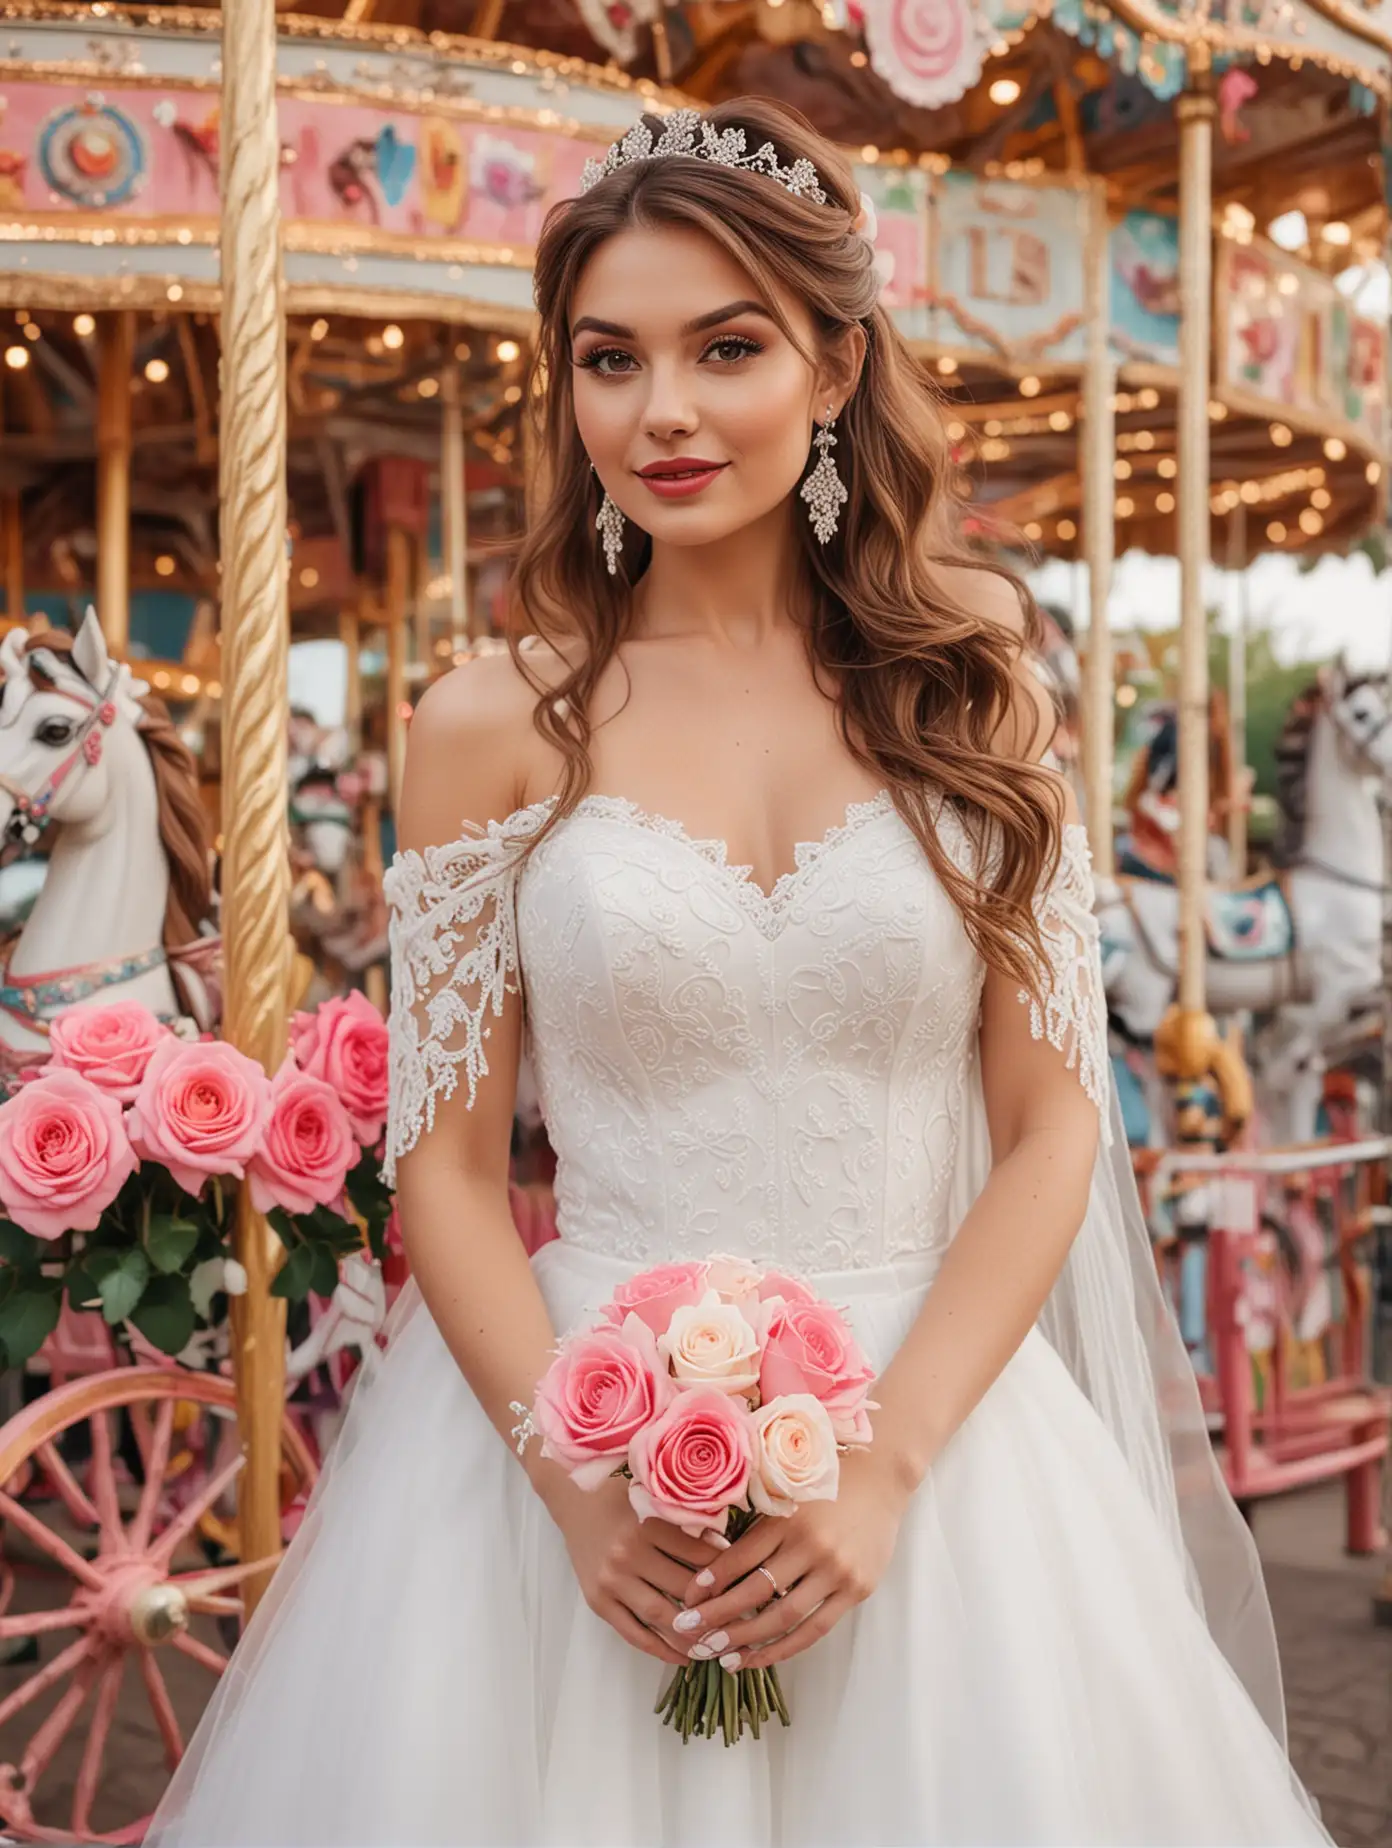 A beautiful bride in a white wedding dress with lace details and a tulle skirt, holding a roses bouquet, posing against the backdrop of a colorful carousel. The bride has long brown hair styled into a sleek loose ponytail hairstyle. She wears silver earrings and pink lipstick